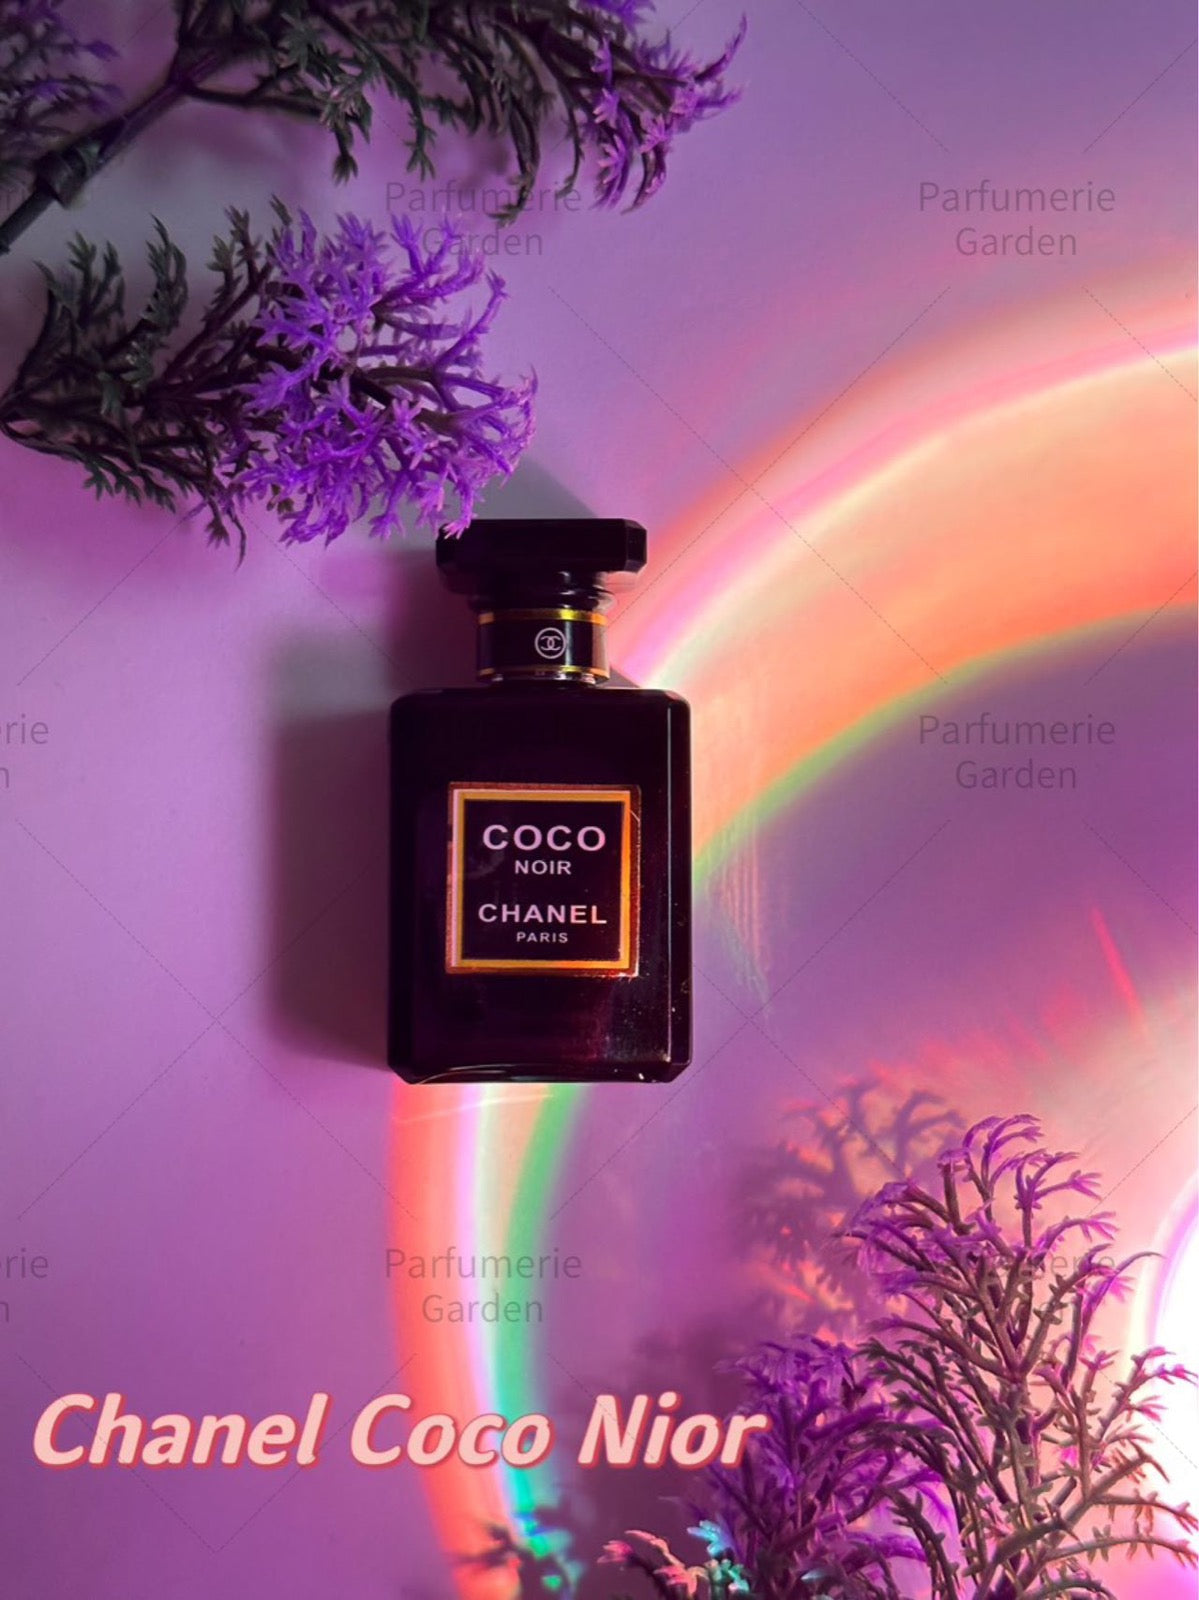 Chanel Coco Noir at Parfumerie Garden - High-Quality Perfumes in Malaysia